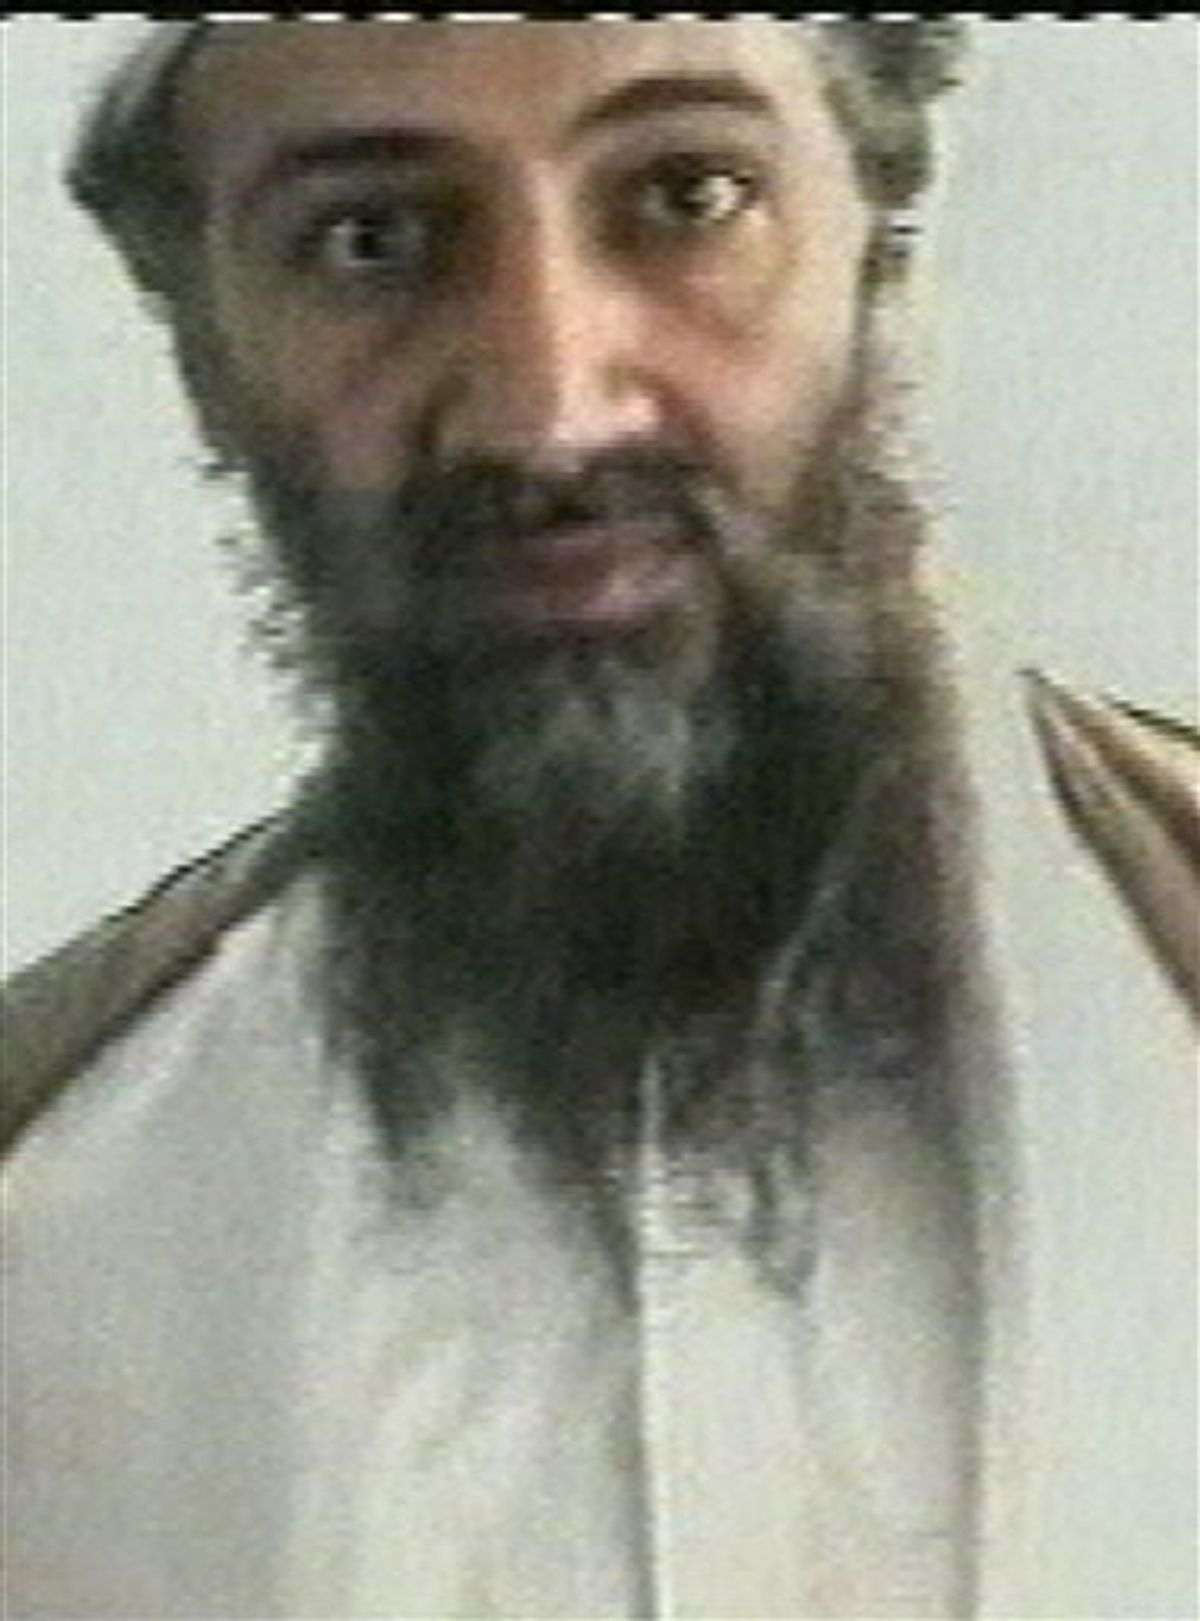 FILE - This undated image taken from video released by Al-Jazeera television on Oct. 5, 2001, shows Osama bin Laden at an undisclosed location. A cellphone of bin Laden's trusted courier recovered in the U.S. raid last month that killed both men in Pakistan contained contacts to a militant group that is a longtime asset of Pakistan's intelligence agency, The New York Times reported late Thursday. (AP Photo/Courtesy of Al-Jazeera via APTN, File) (AP)